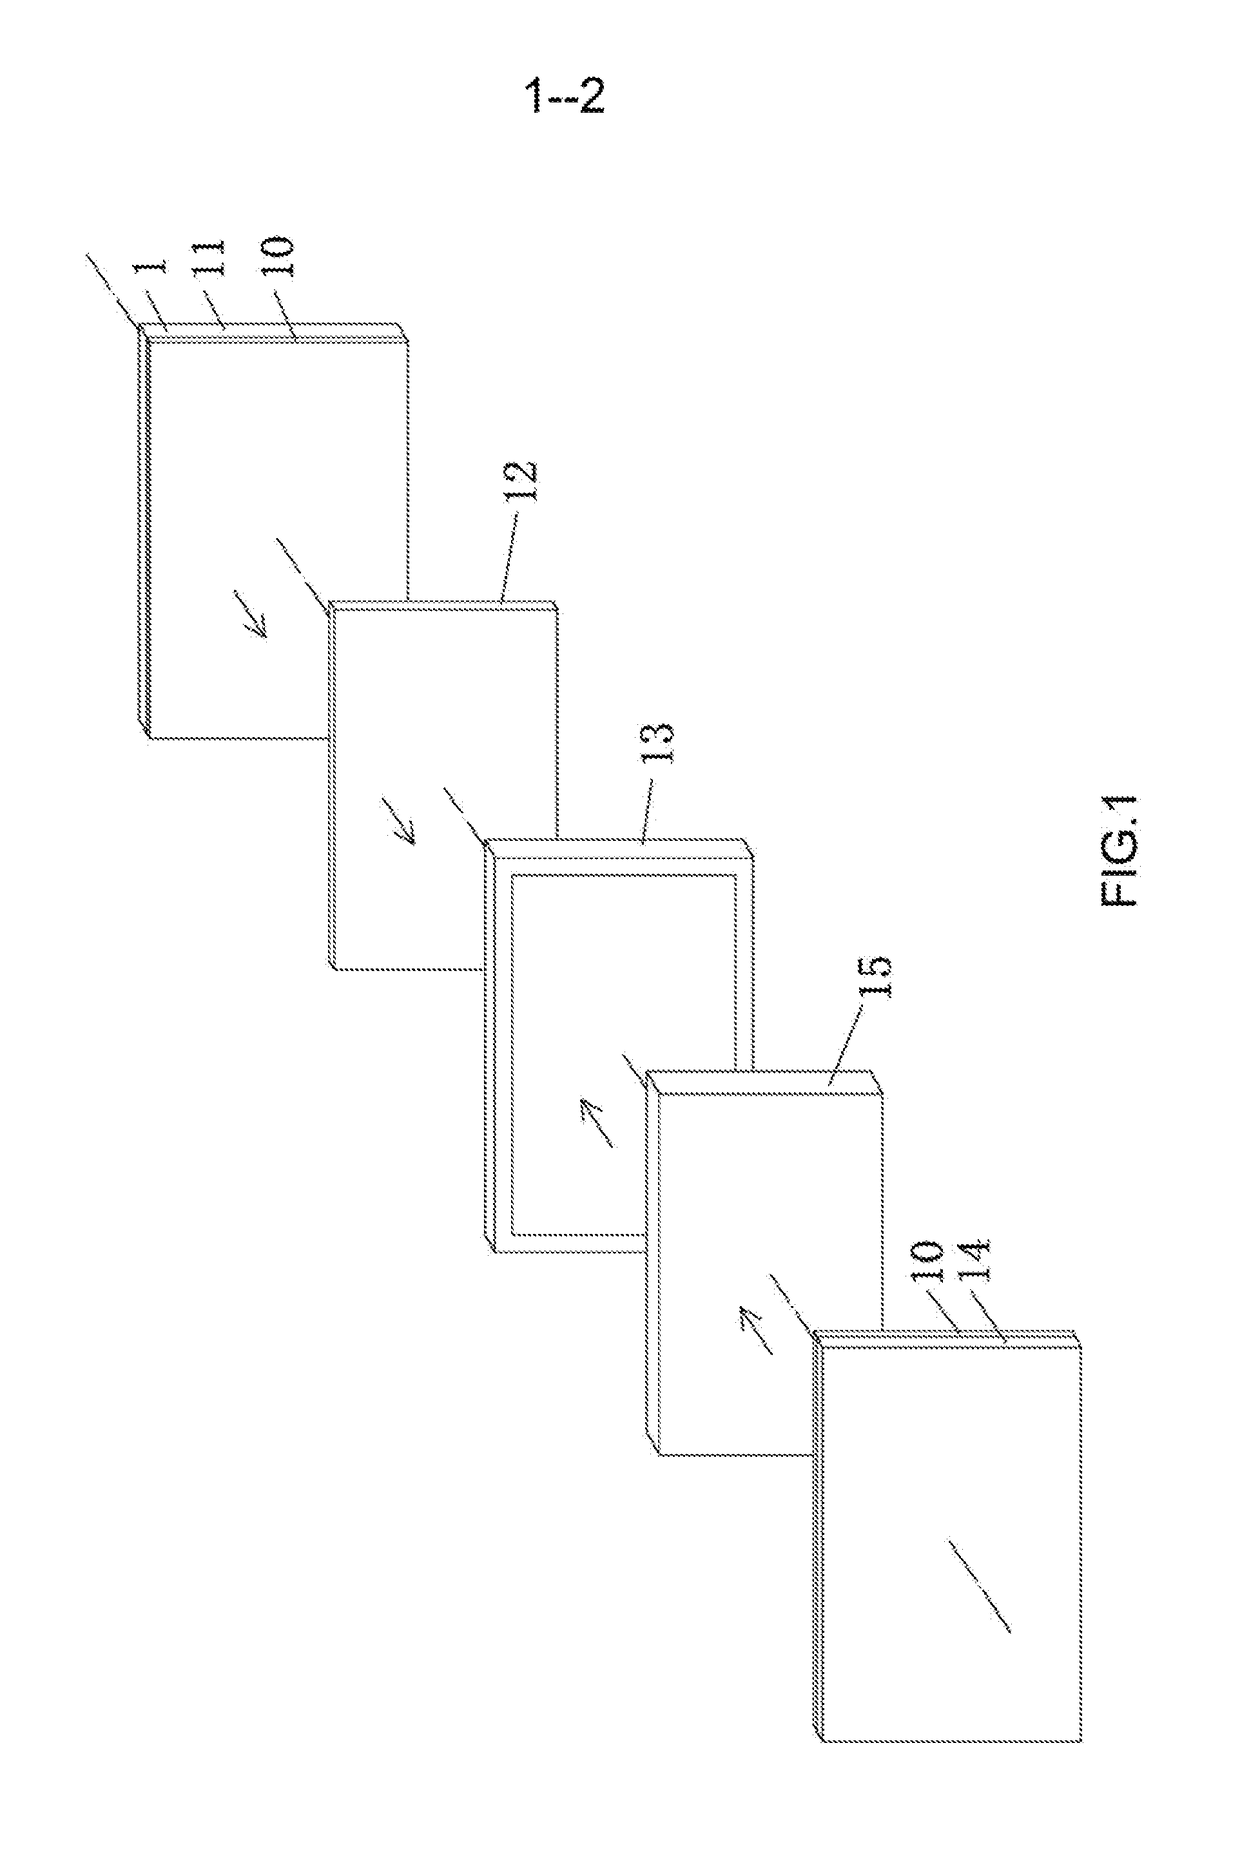 Integrated Fully-sealed Liquid Cryatal Screen and Manufacturing Process for Same